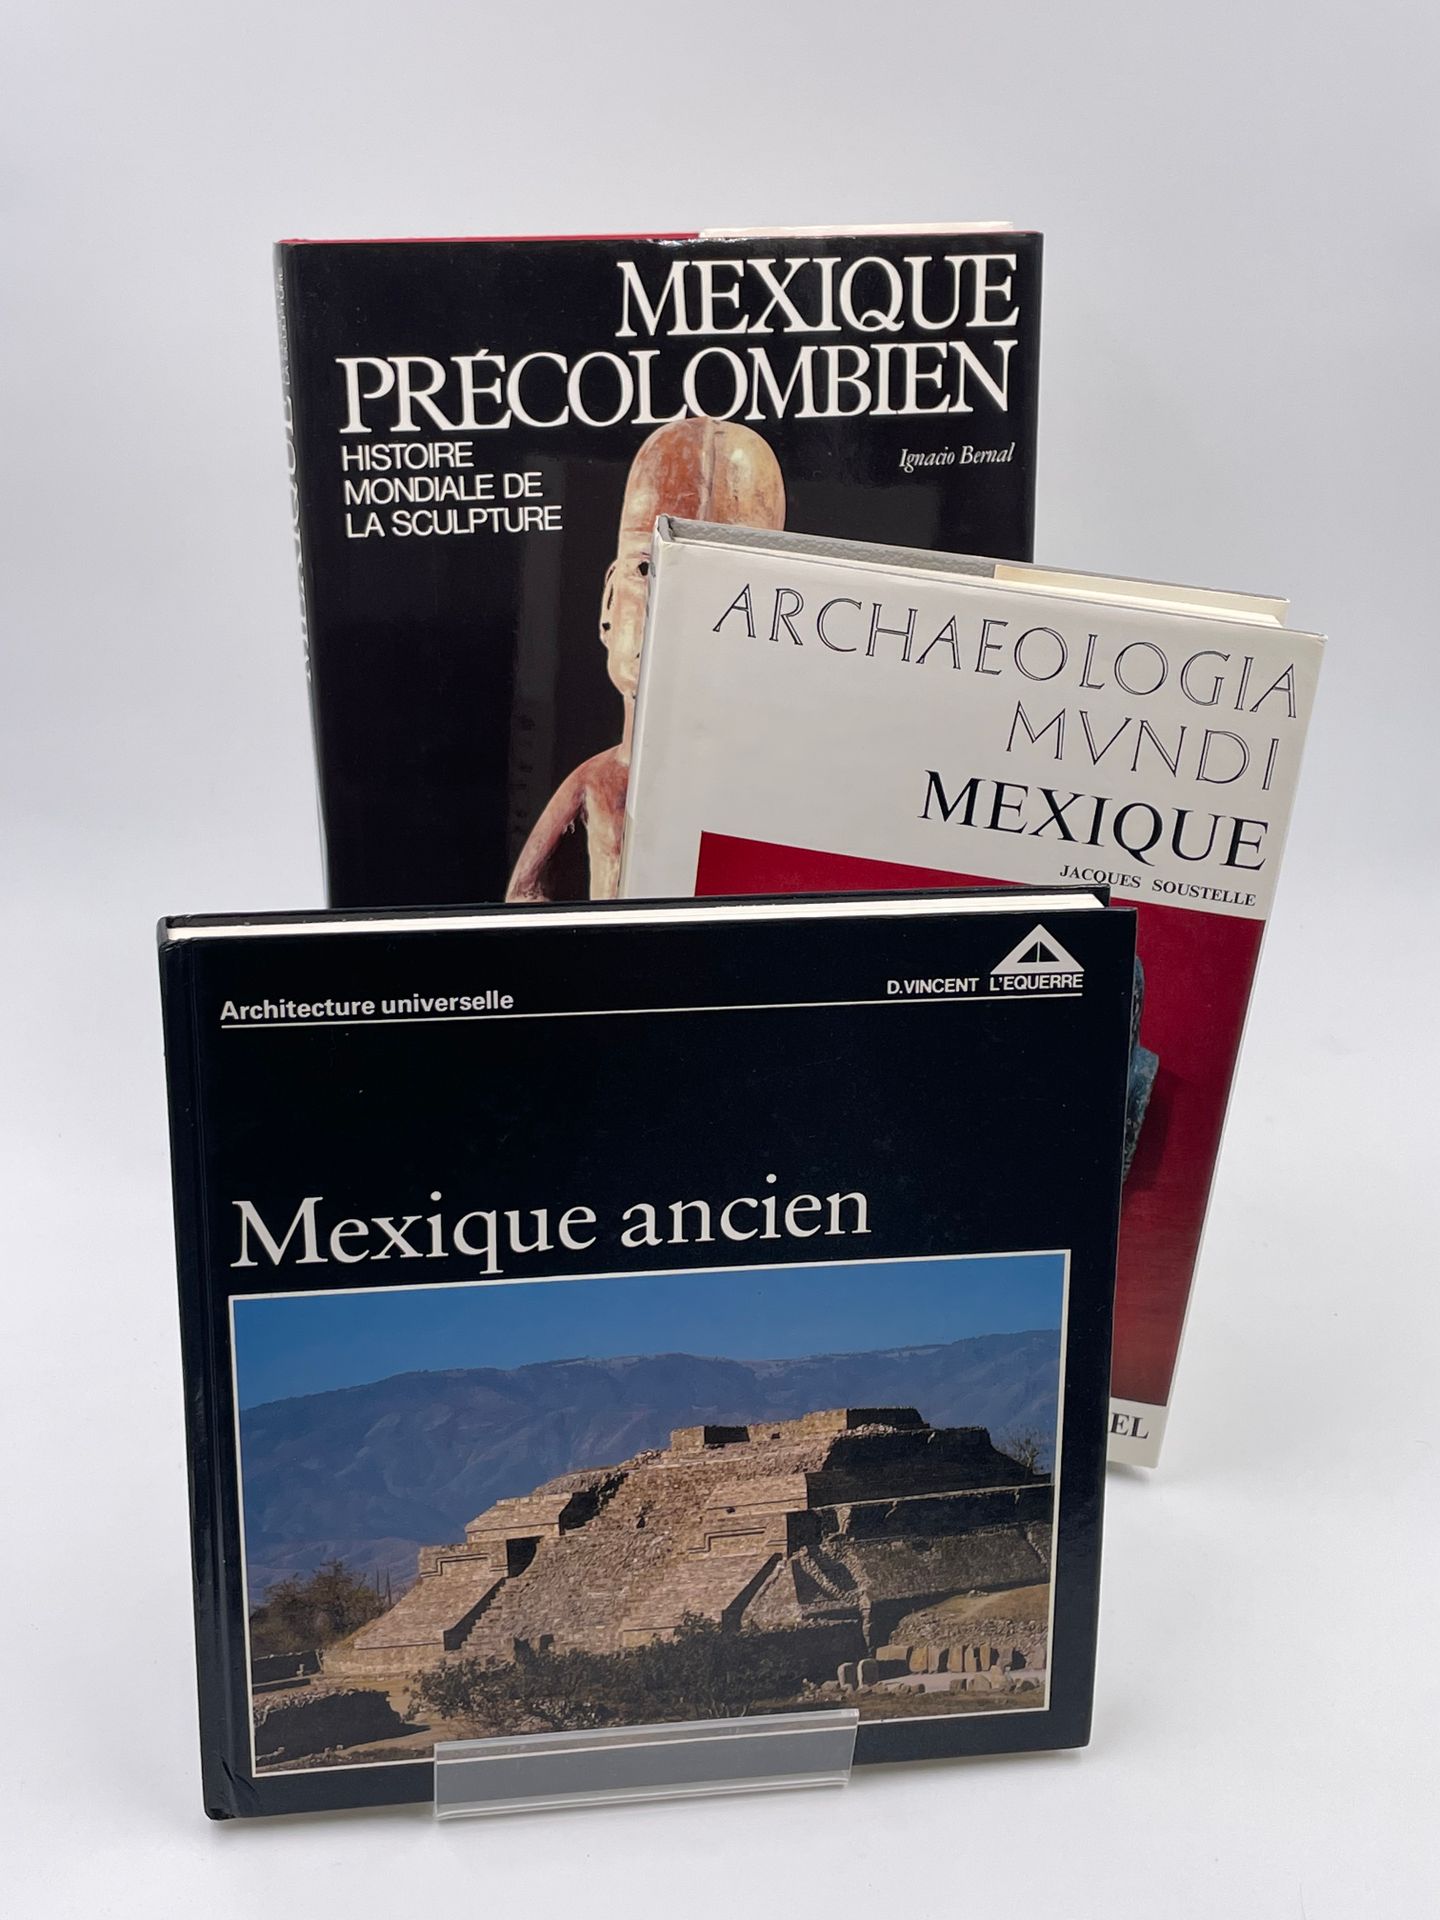 Null 3卷 :

- MEXICO" Jacques Soustelle, Archaeologia Mundi, Editions Nagel Genev&hellip;